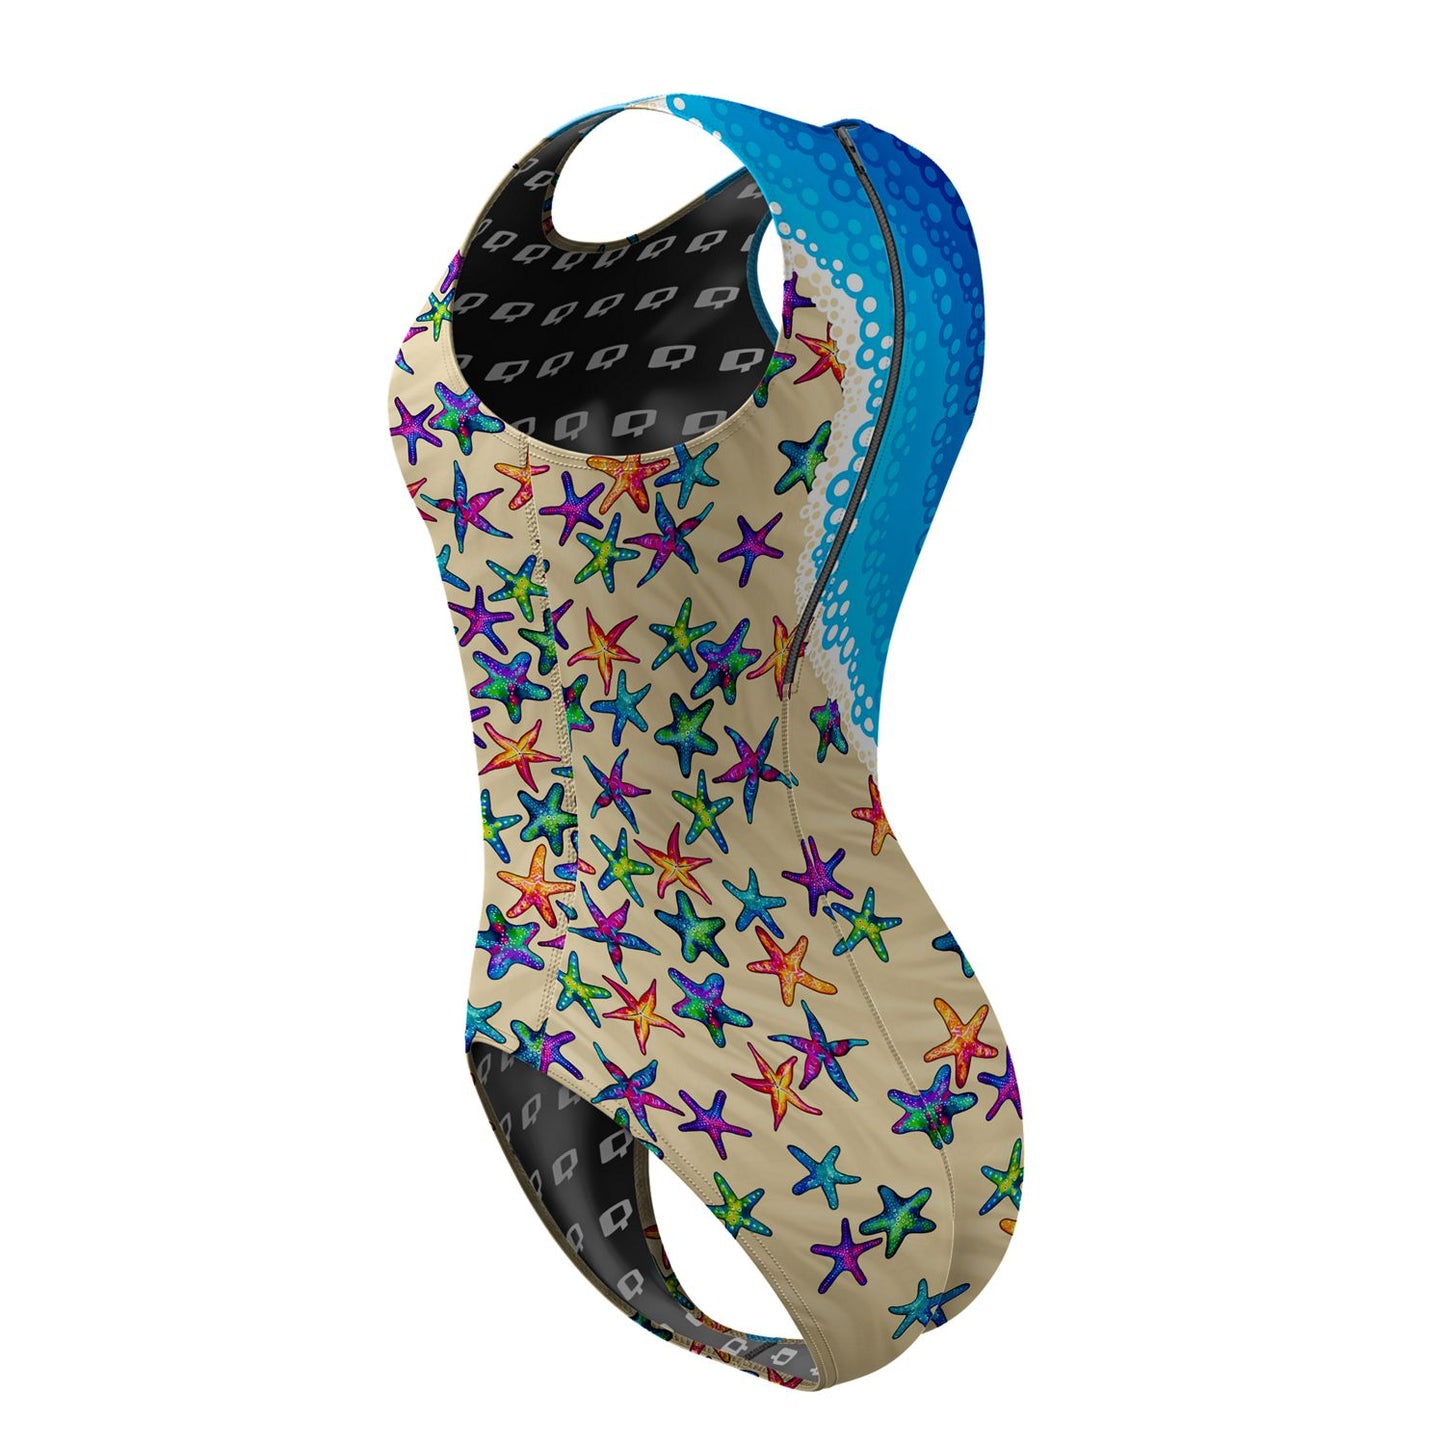 Sunkissed Starfish - Women Waterpolo Swimsuit Classic Cut